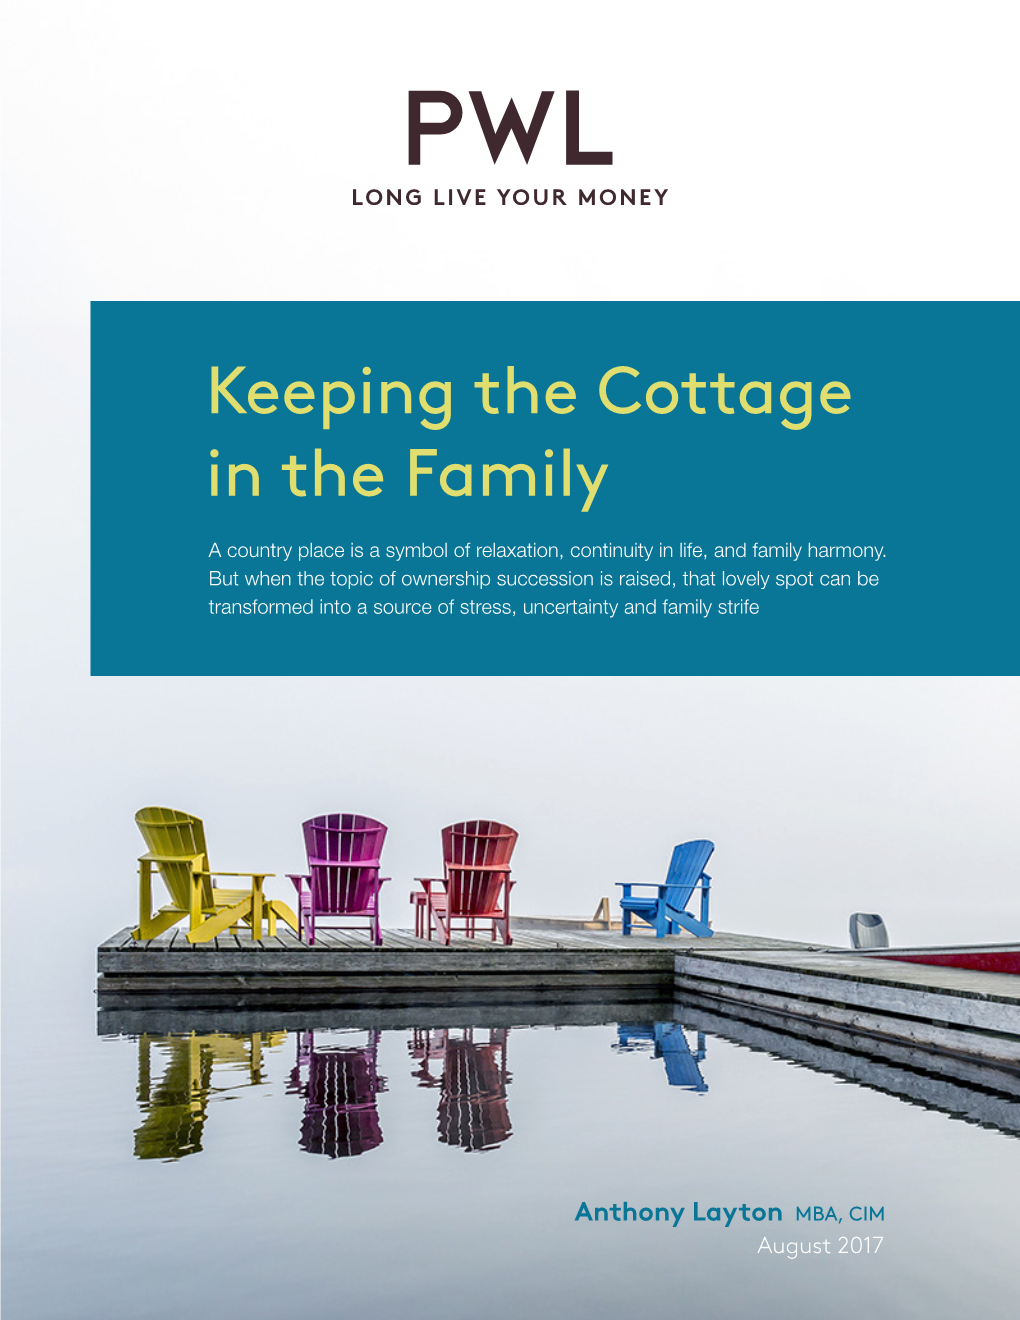 Keeping the Cottage in the Family